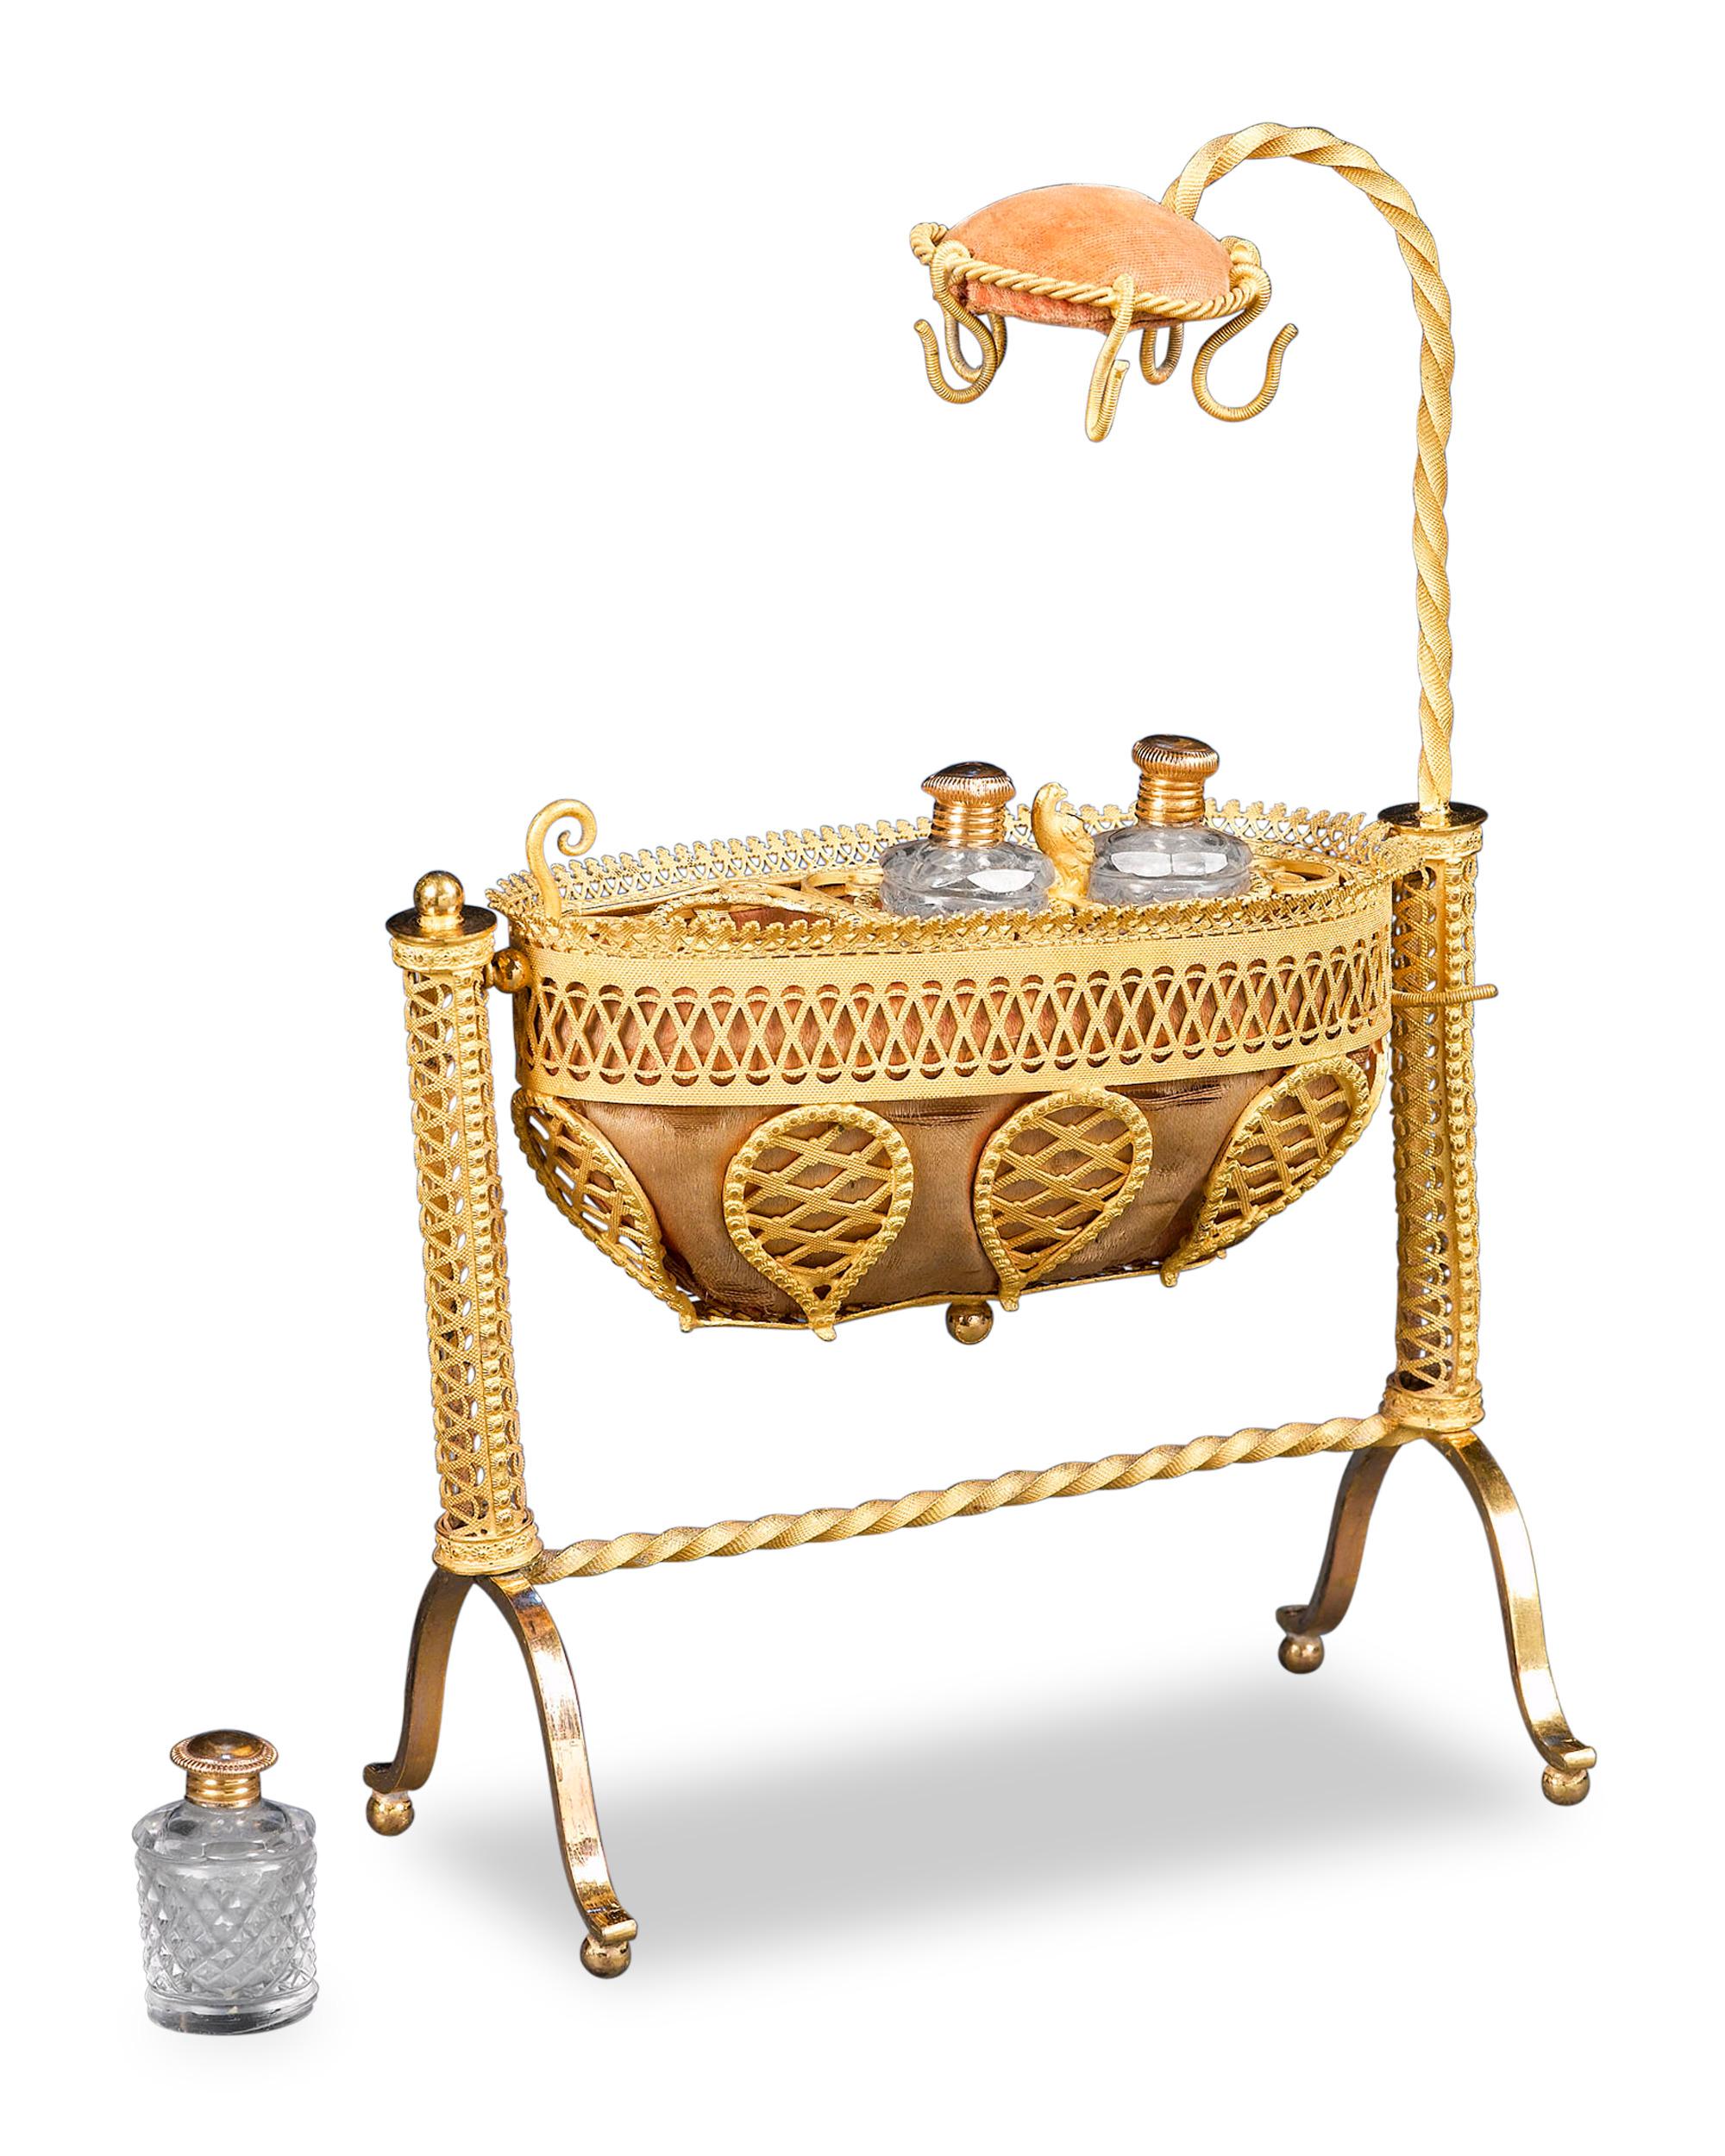 This rare and intricate French perfume bears precious cargo in its bassinet-form design. Crafted of lace-like doré bronze with silk and velvet accents, the swinging cradle holds three cut crystal perfume bottles, each with a gilt bronze cap and